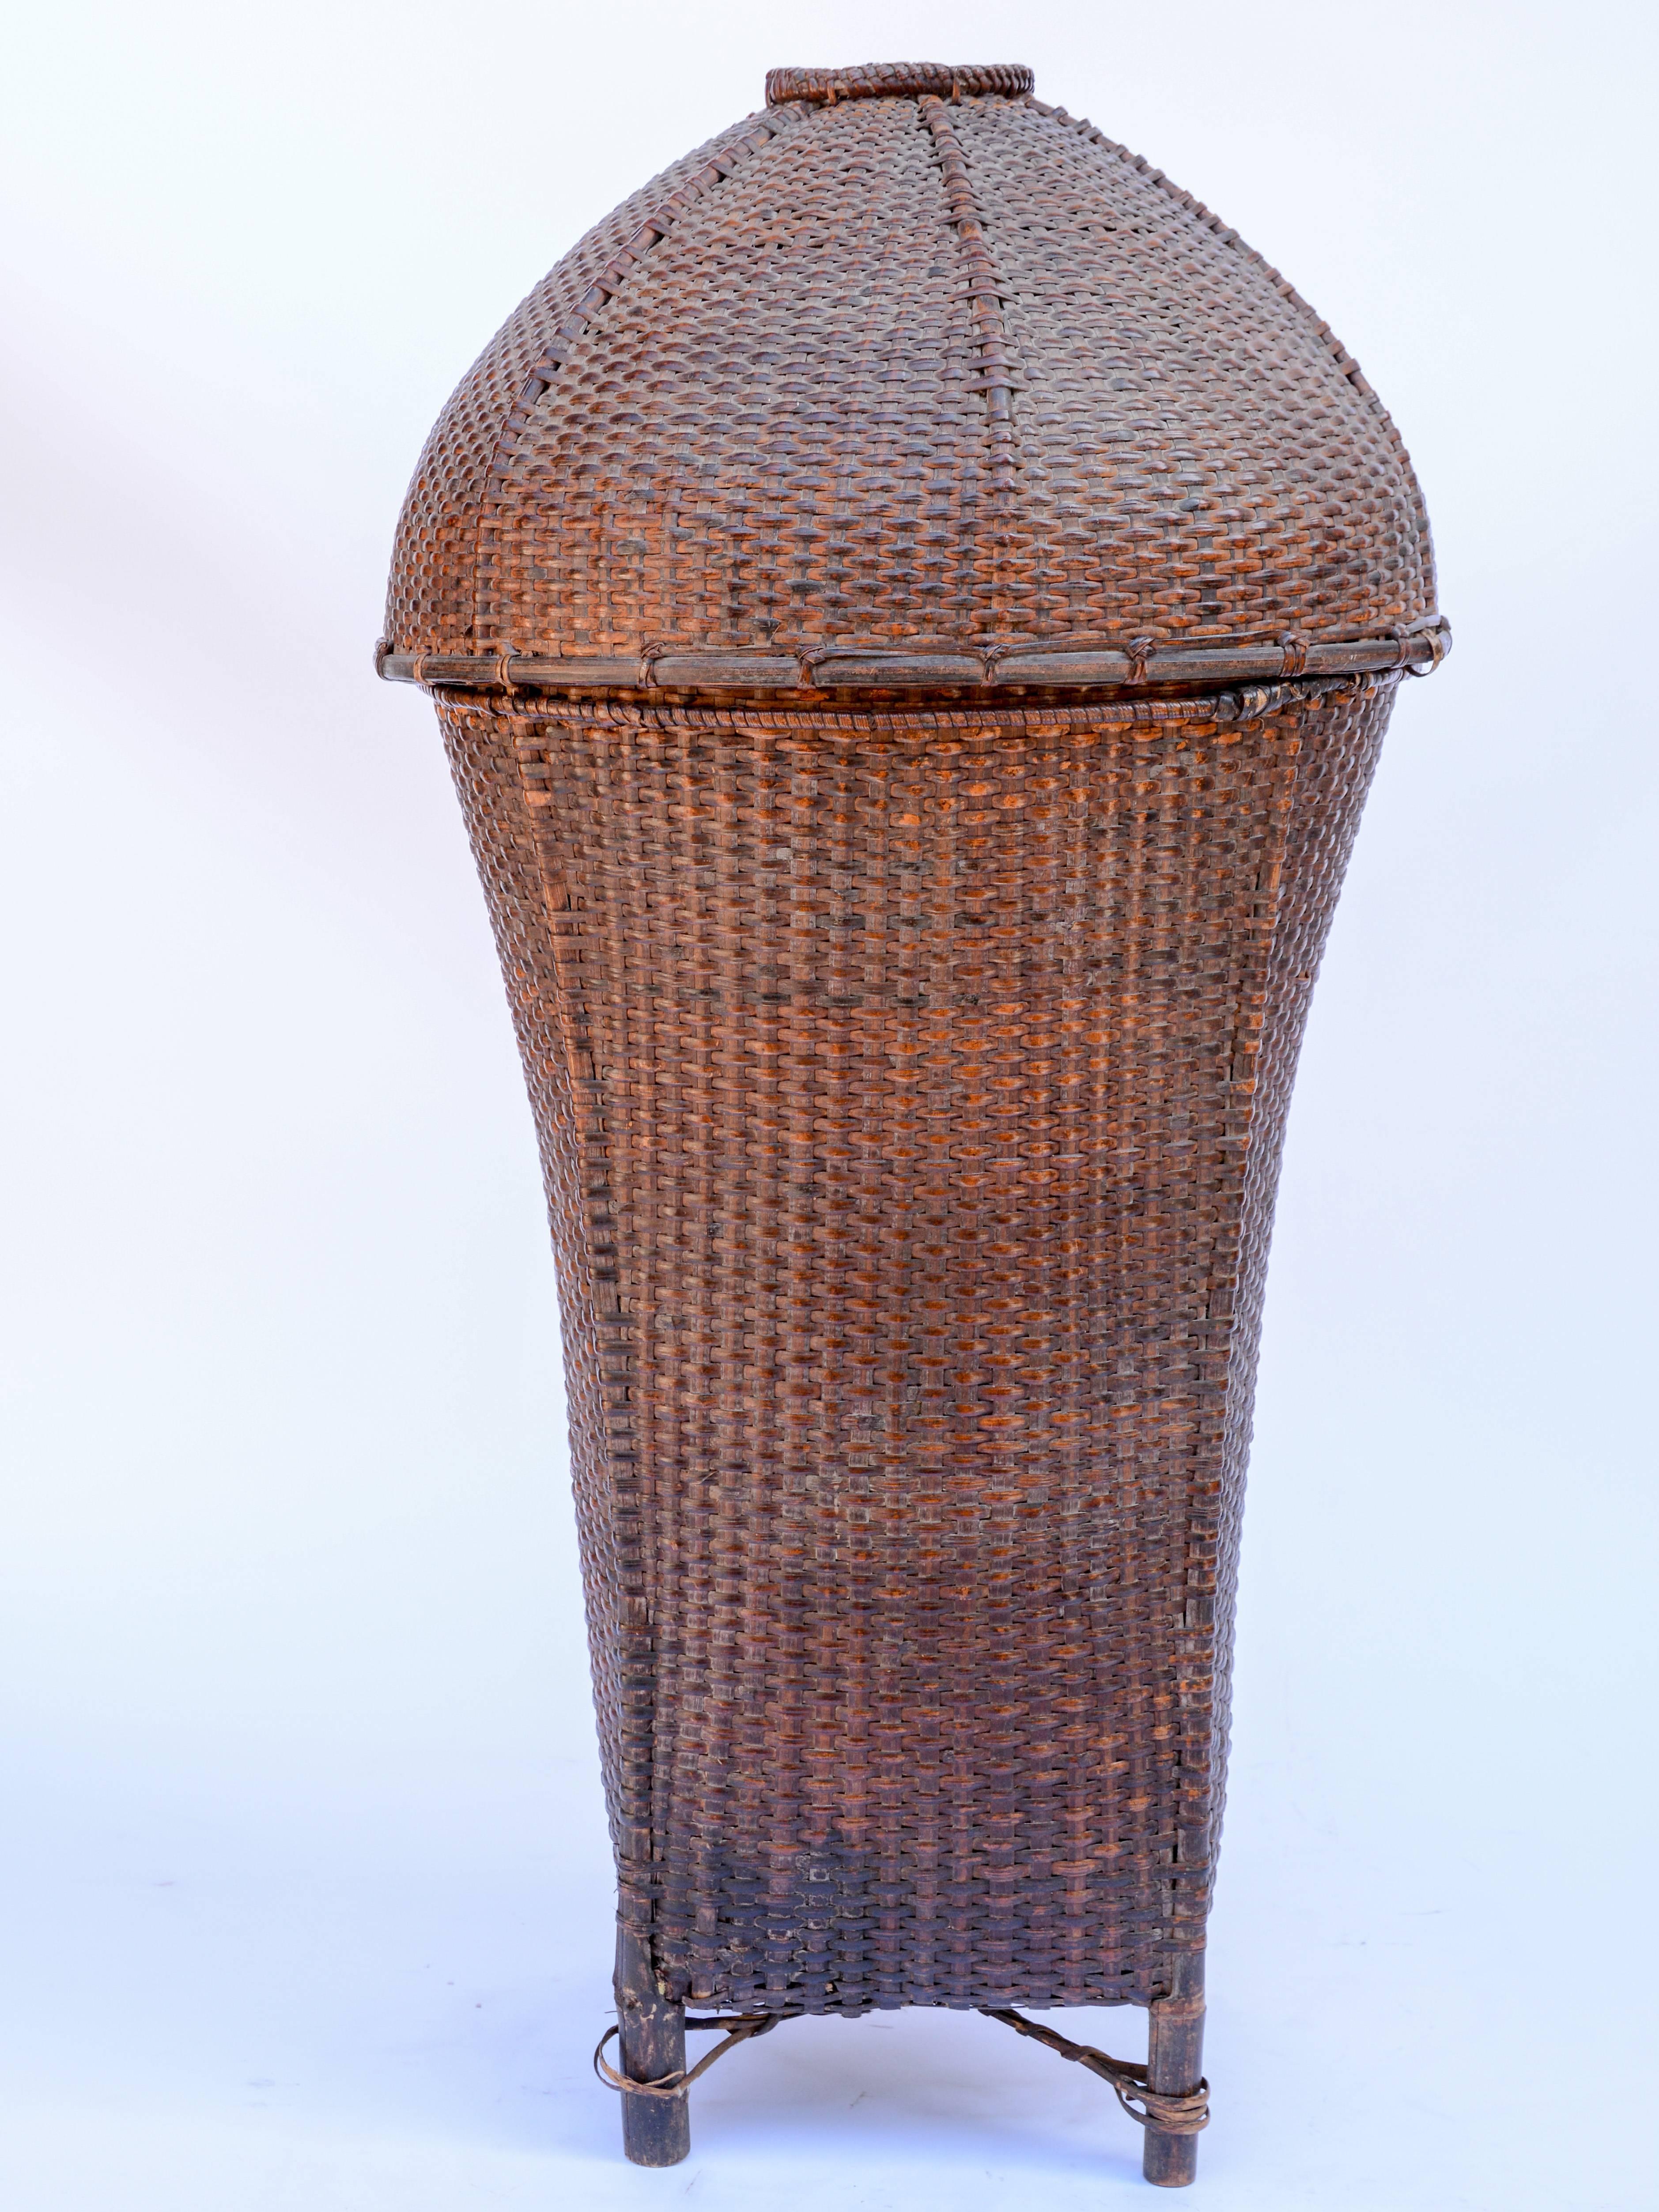 Vintage storage basket with Domed Lid. Rawang people of Burma, mid-20th century, bamboo
Offered by Bruce Hughes.
This large footed basket would have been used to transport and store household items - textiles and other valuables. It comes from the